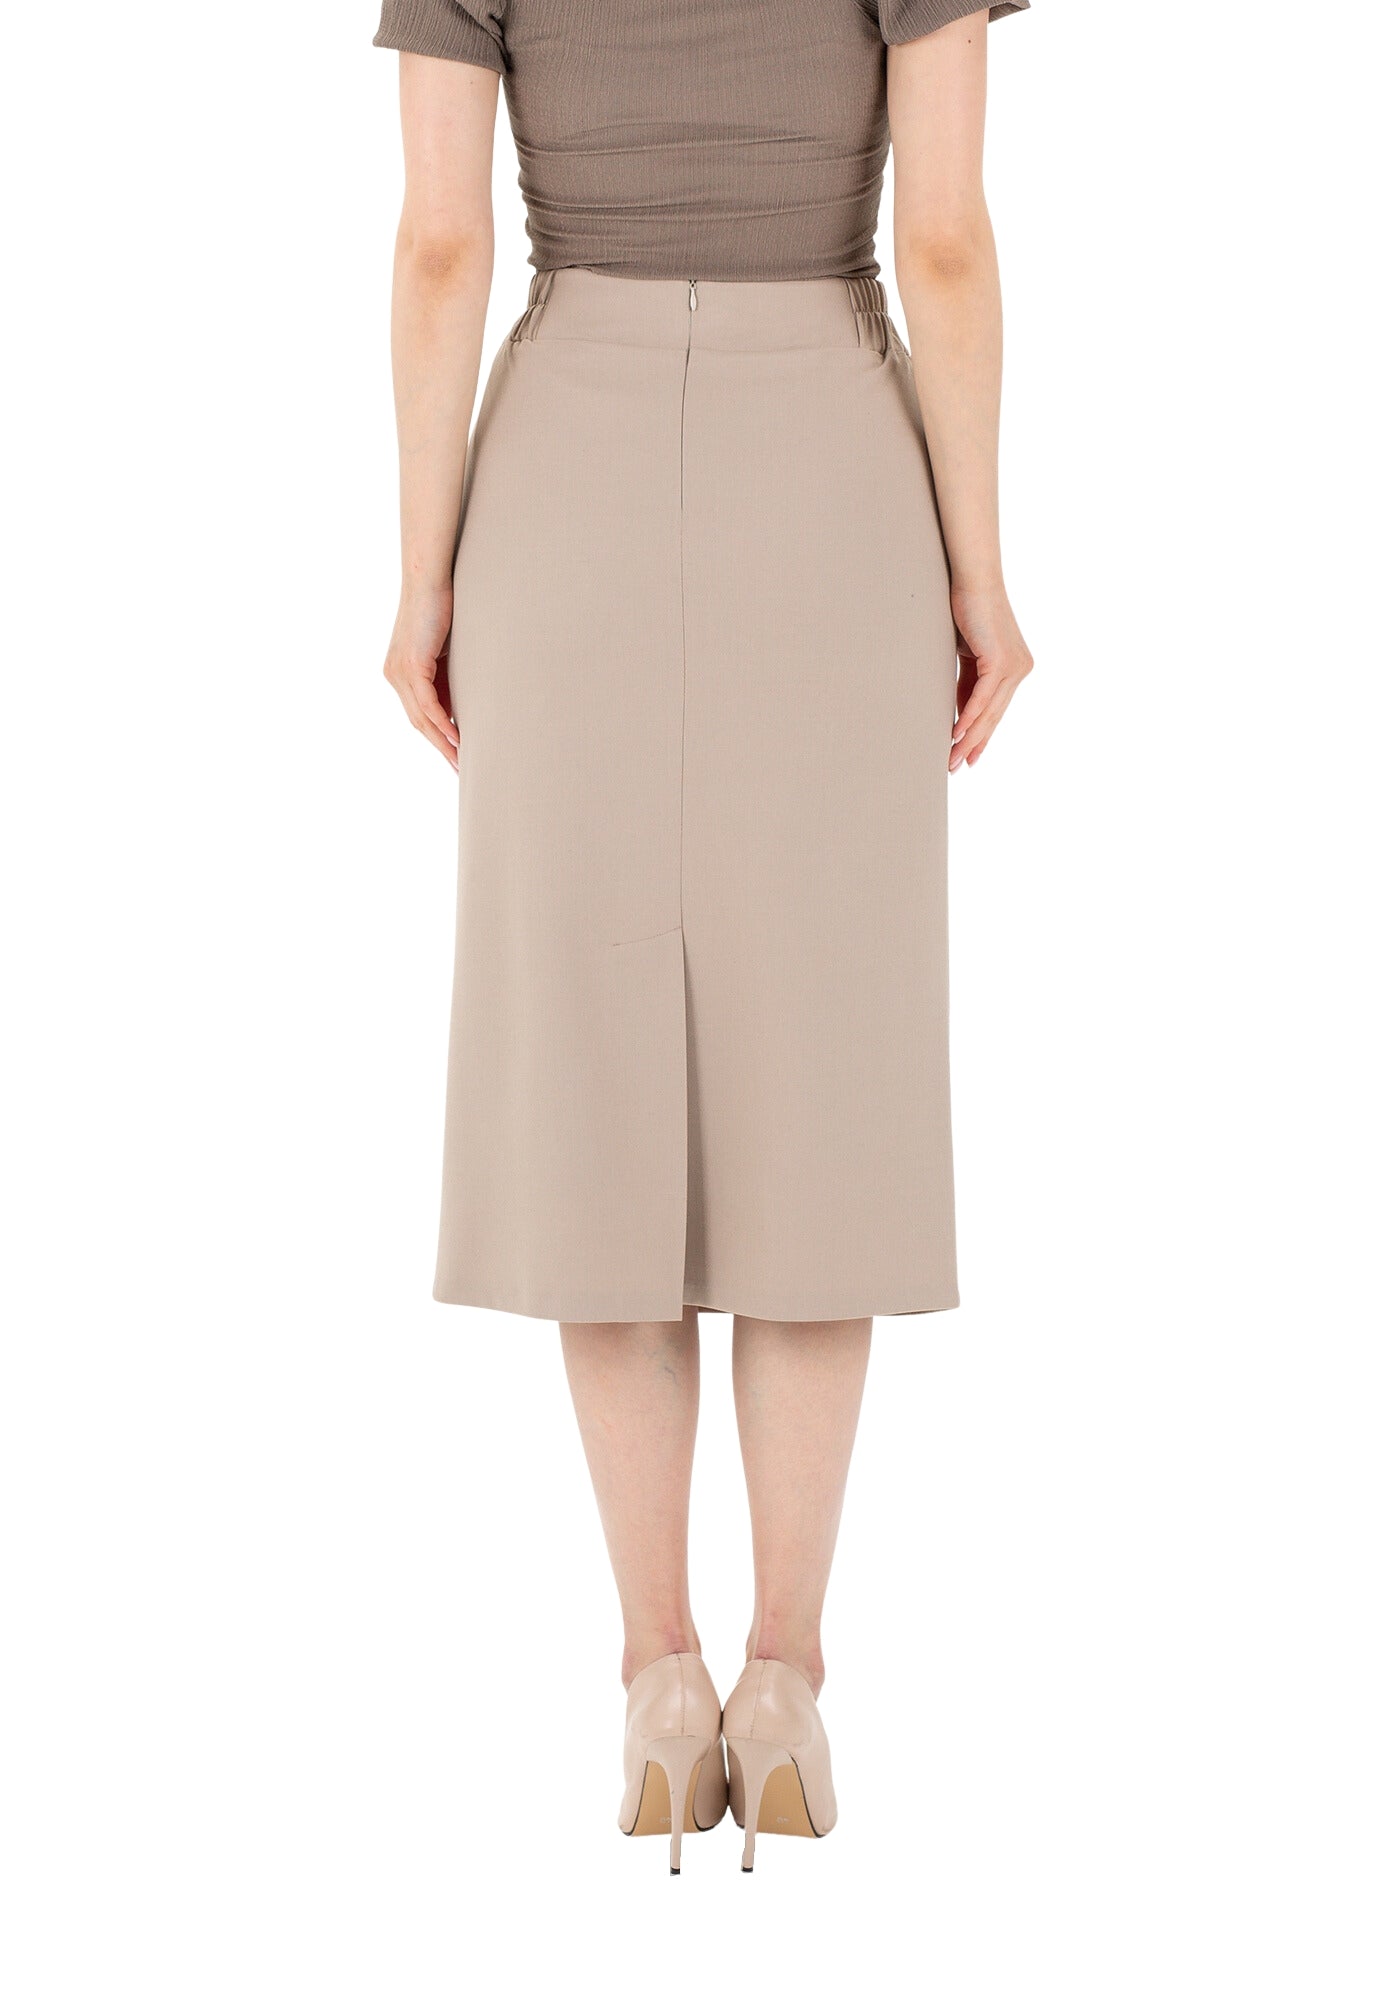 Stone Midi Pencil Skirt with Elastic Waist and Closed Back Vent G-Line